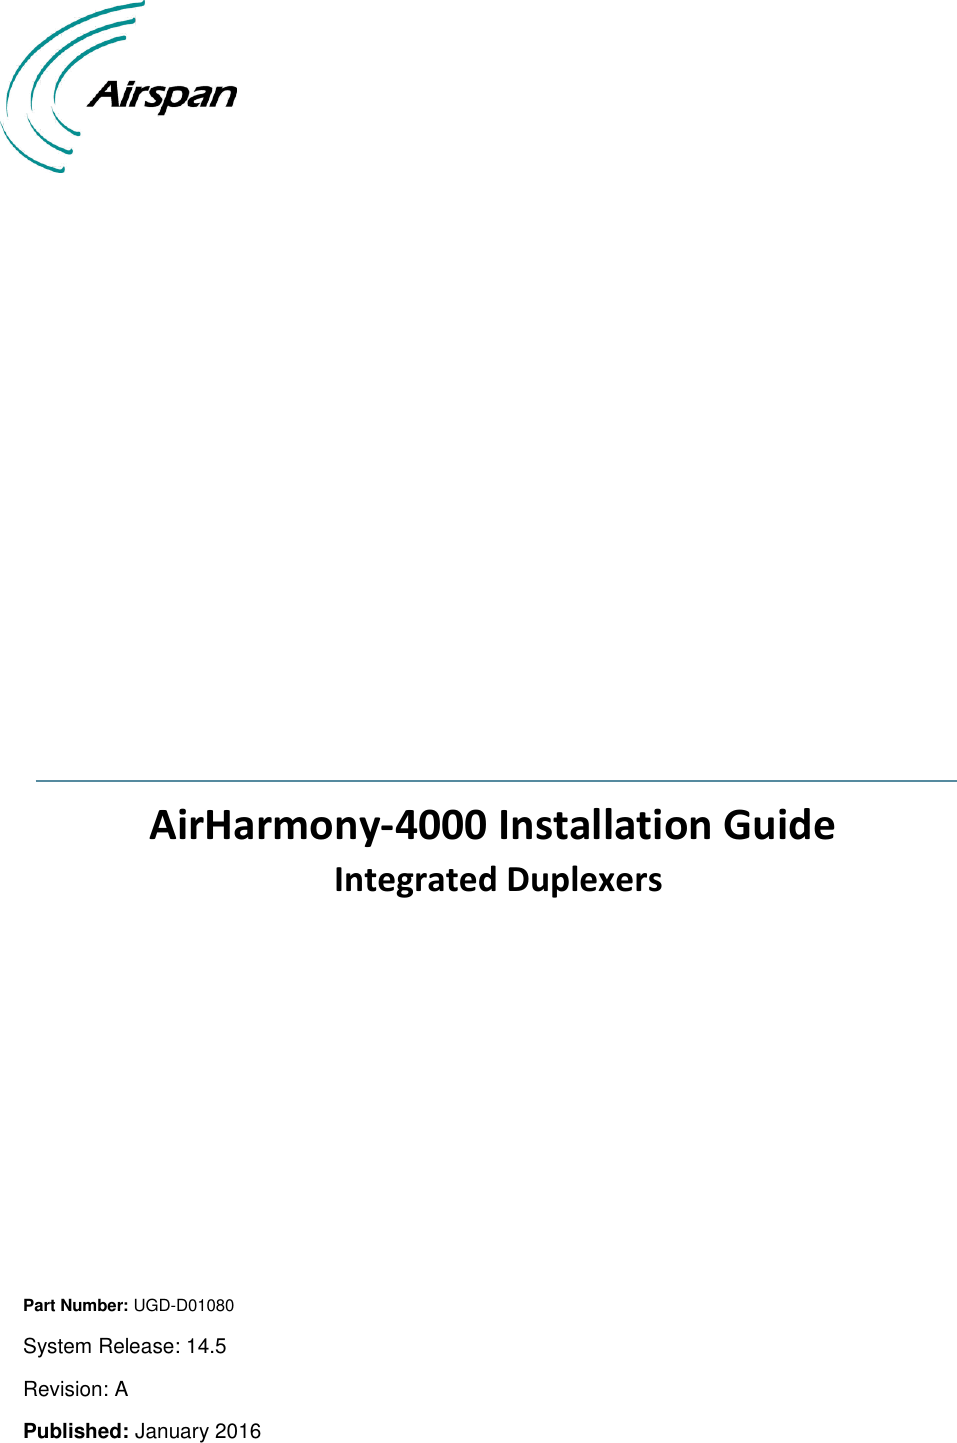                     AirHarmony-4000 Installation Guide  Integrated Duplexers         Part Number: UGD-D01080 System Release: 14.5 Revision: A Published: January 2016 